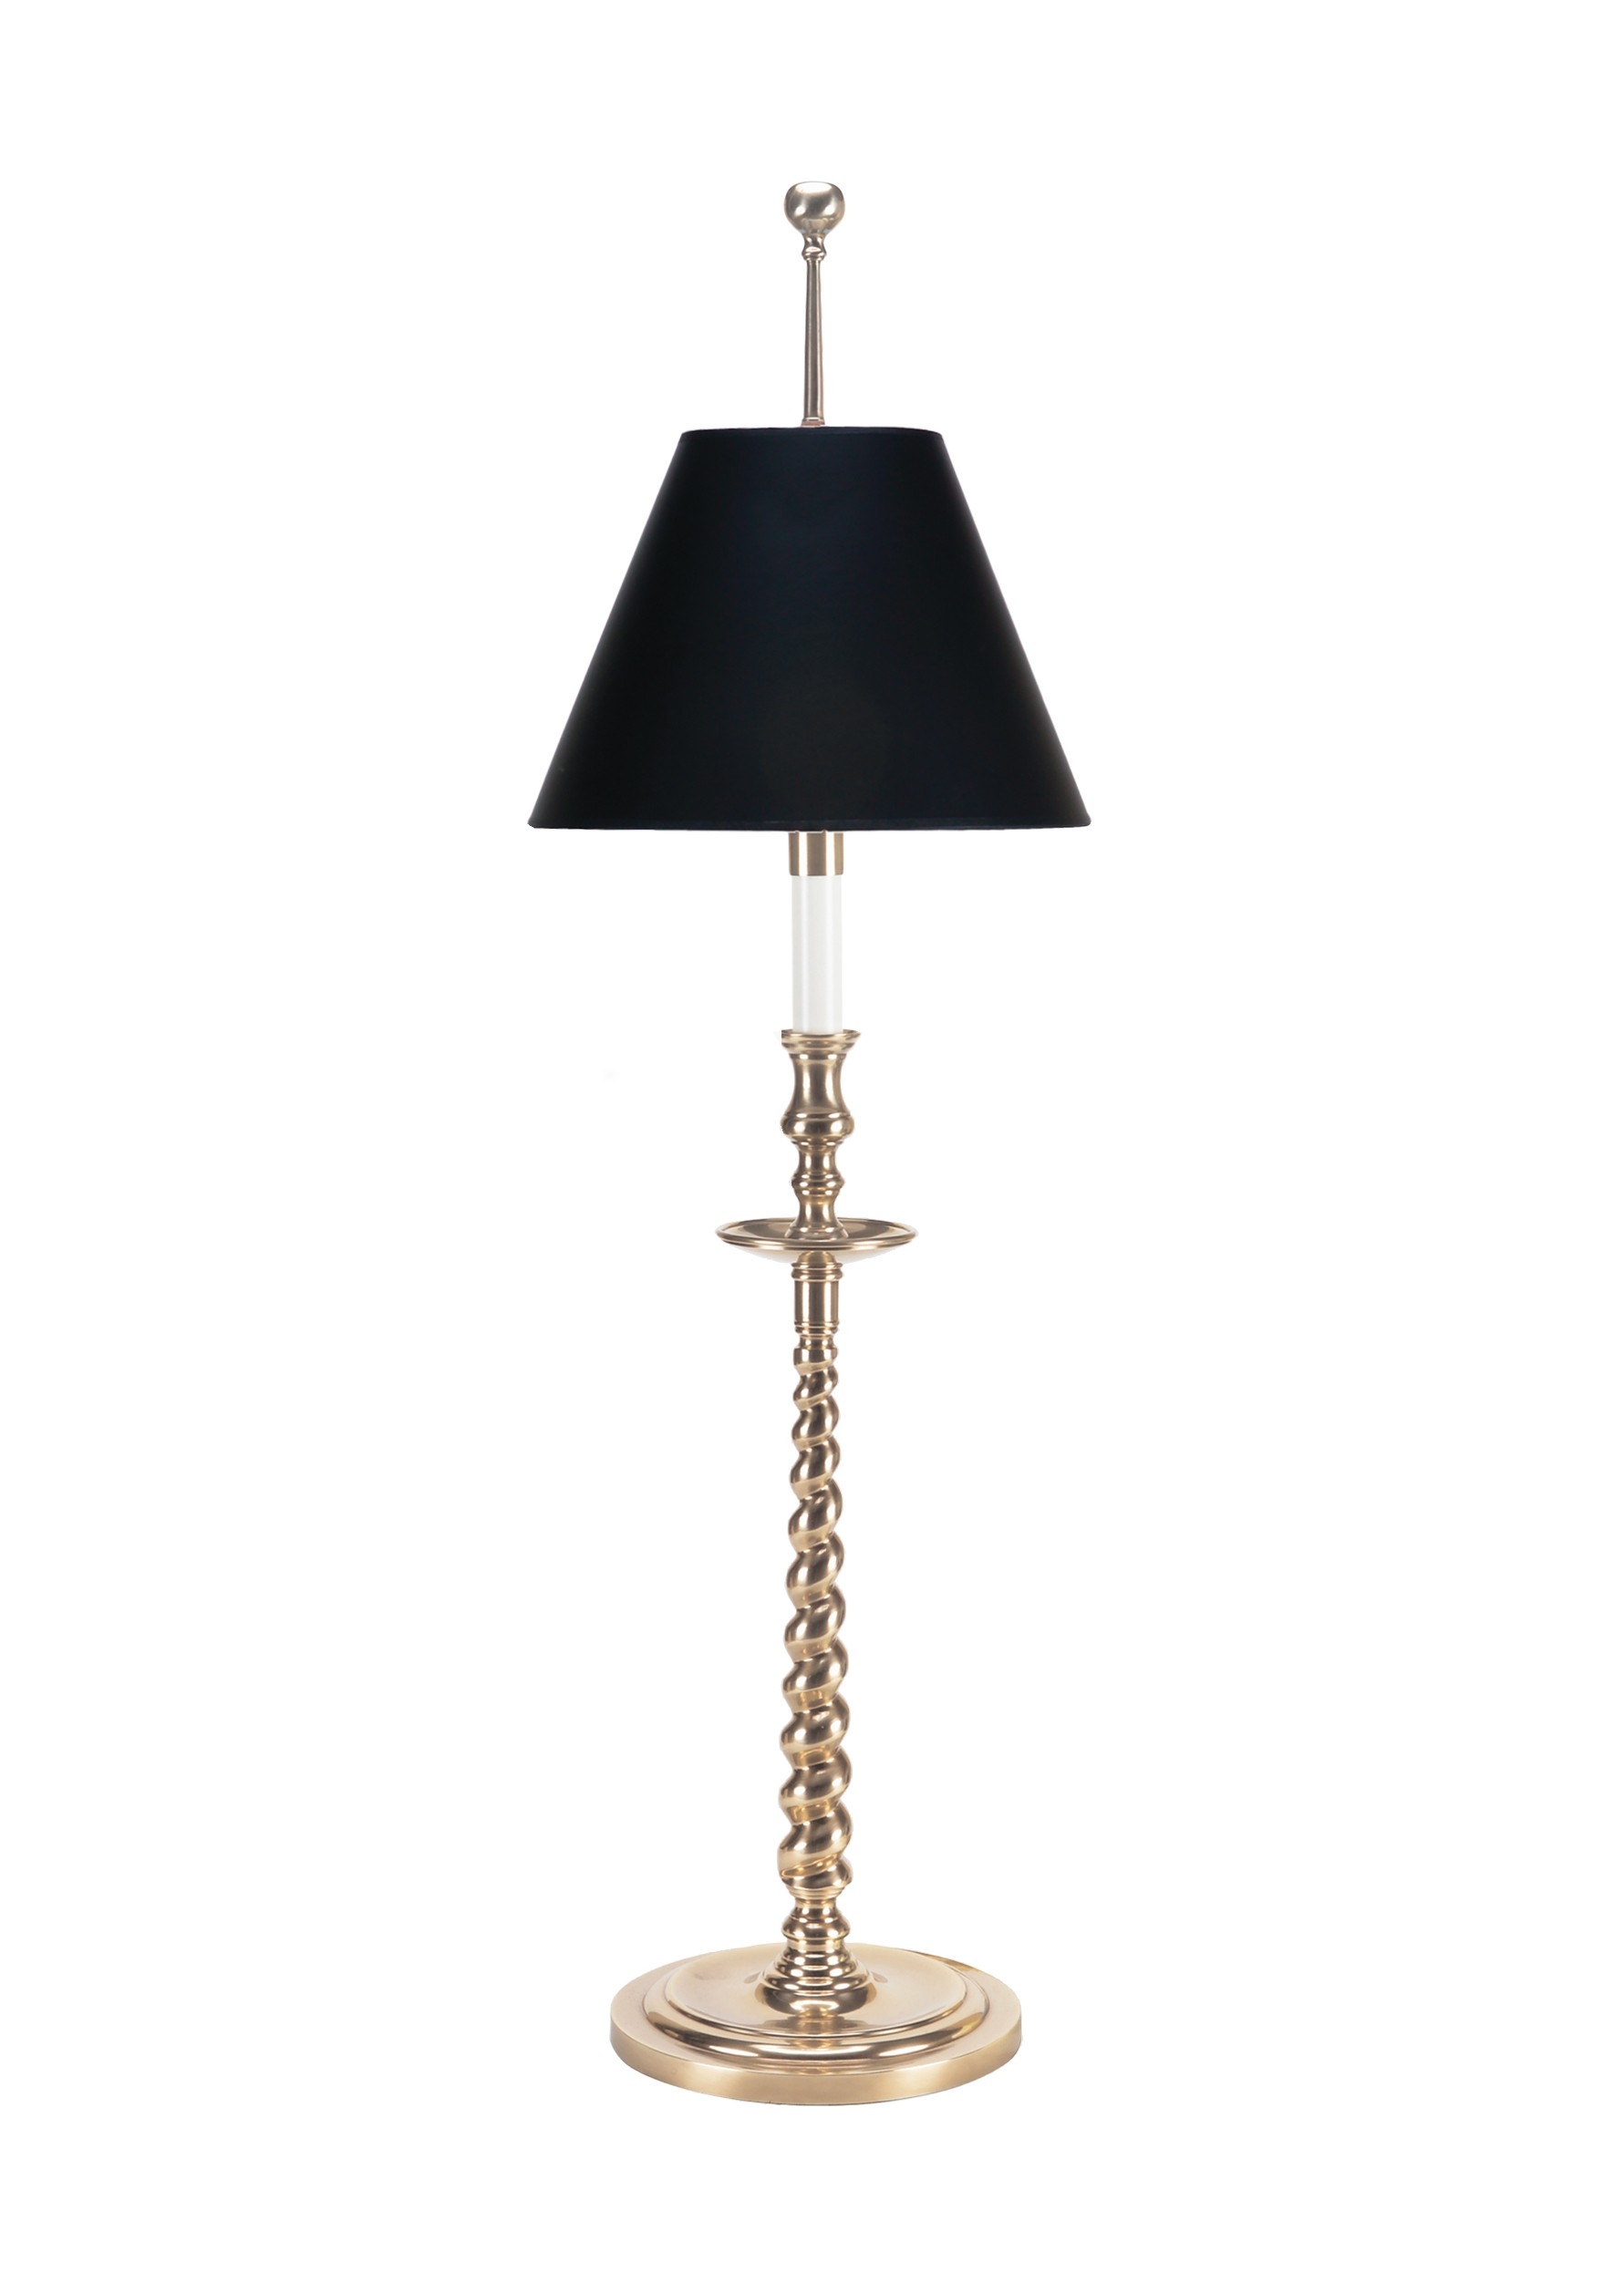 Brass candlestick table lamps